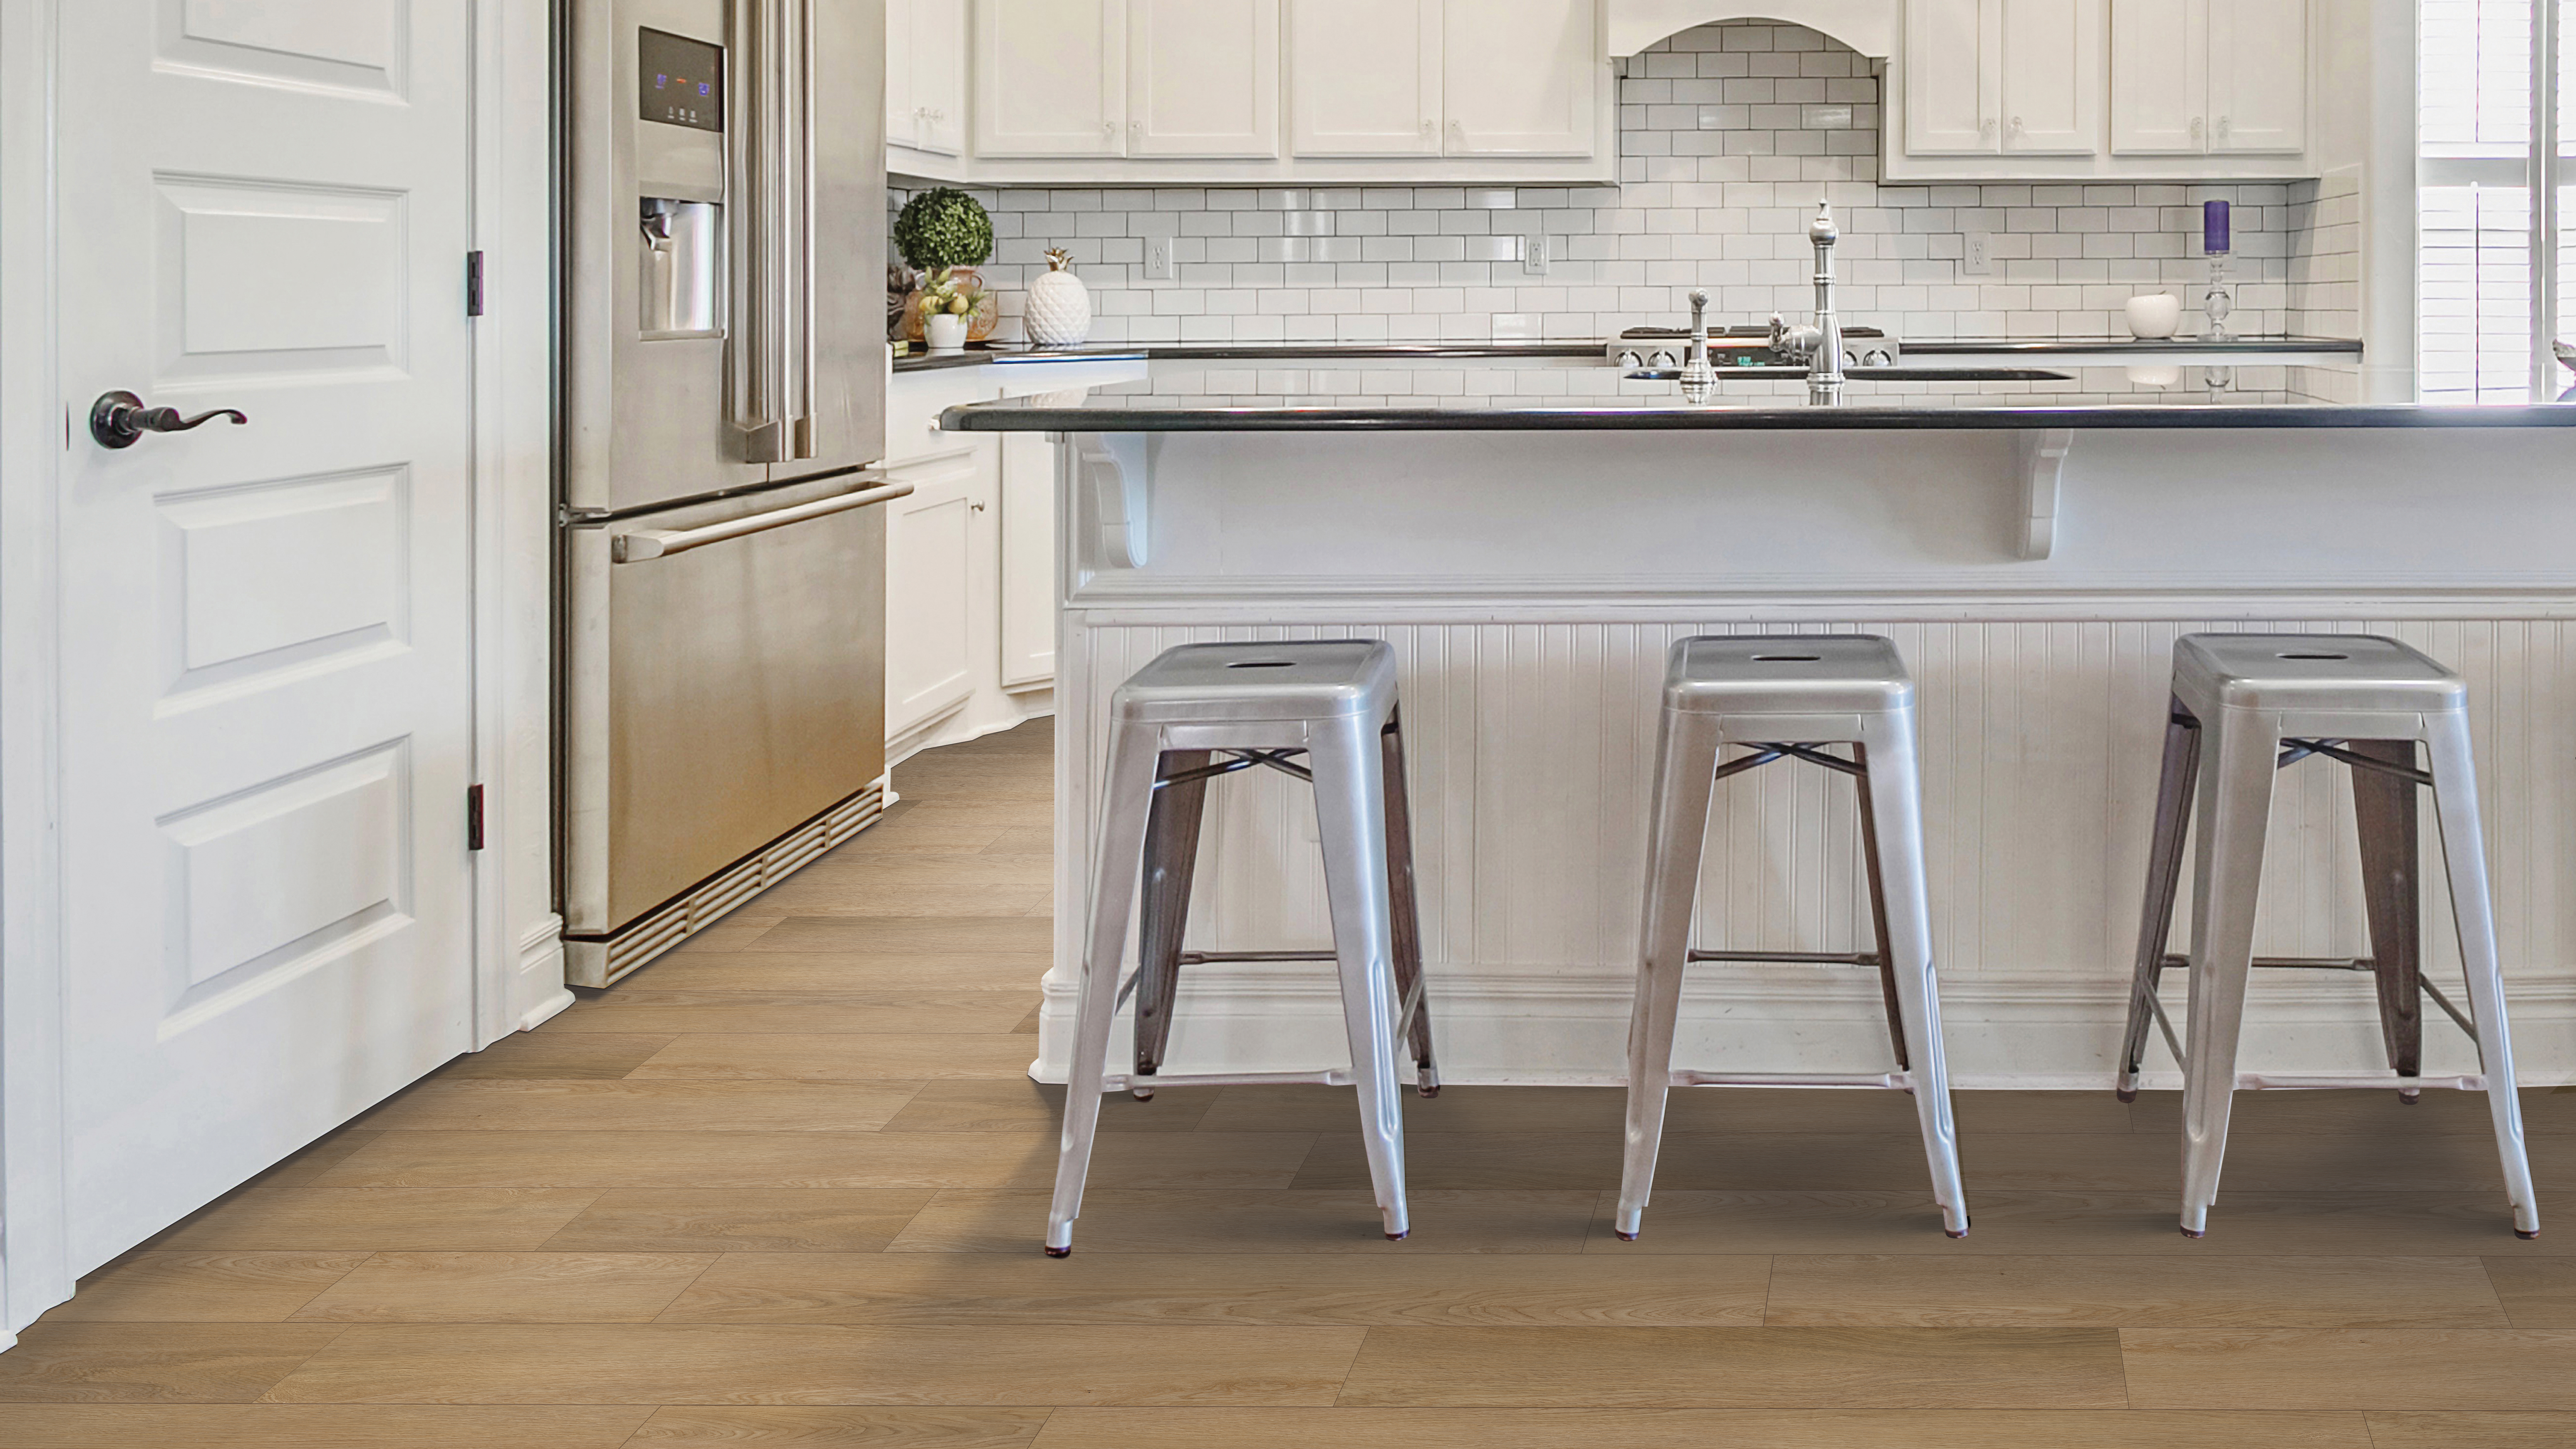 Newly Installed Luxury Vinyl flooring in the kitchen of a home with 3 bar stools